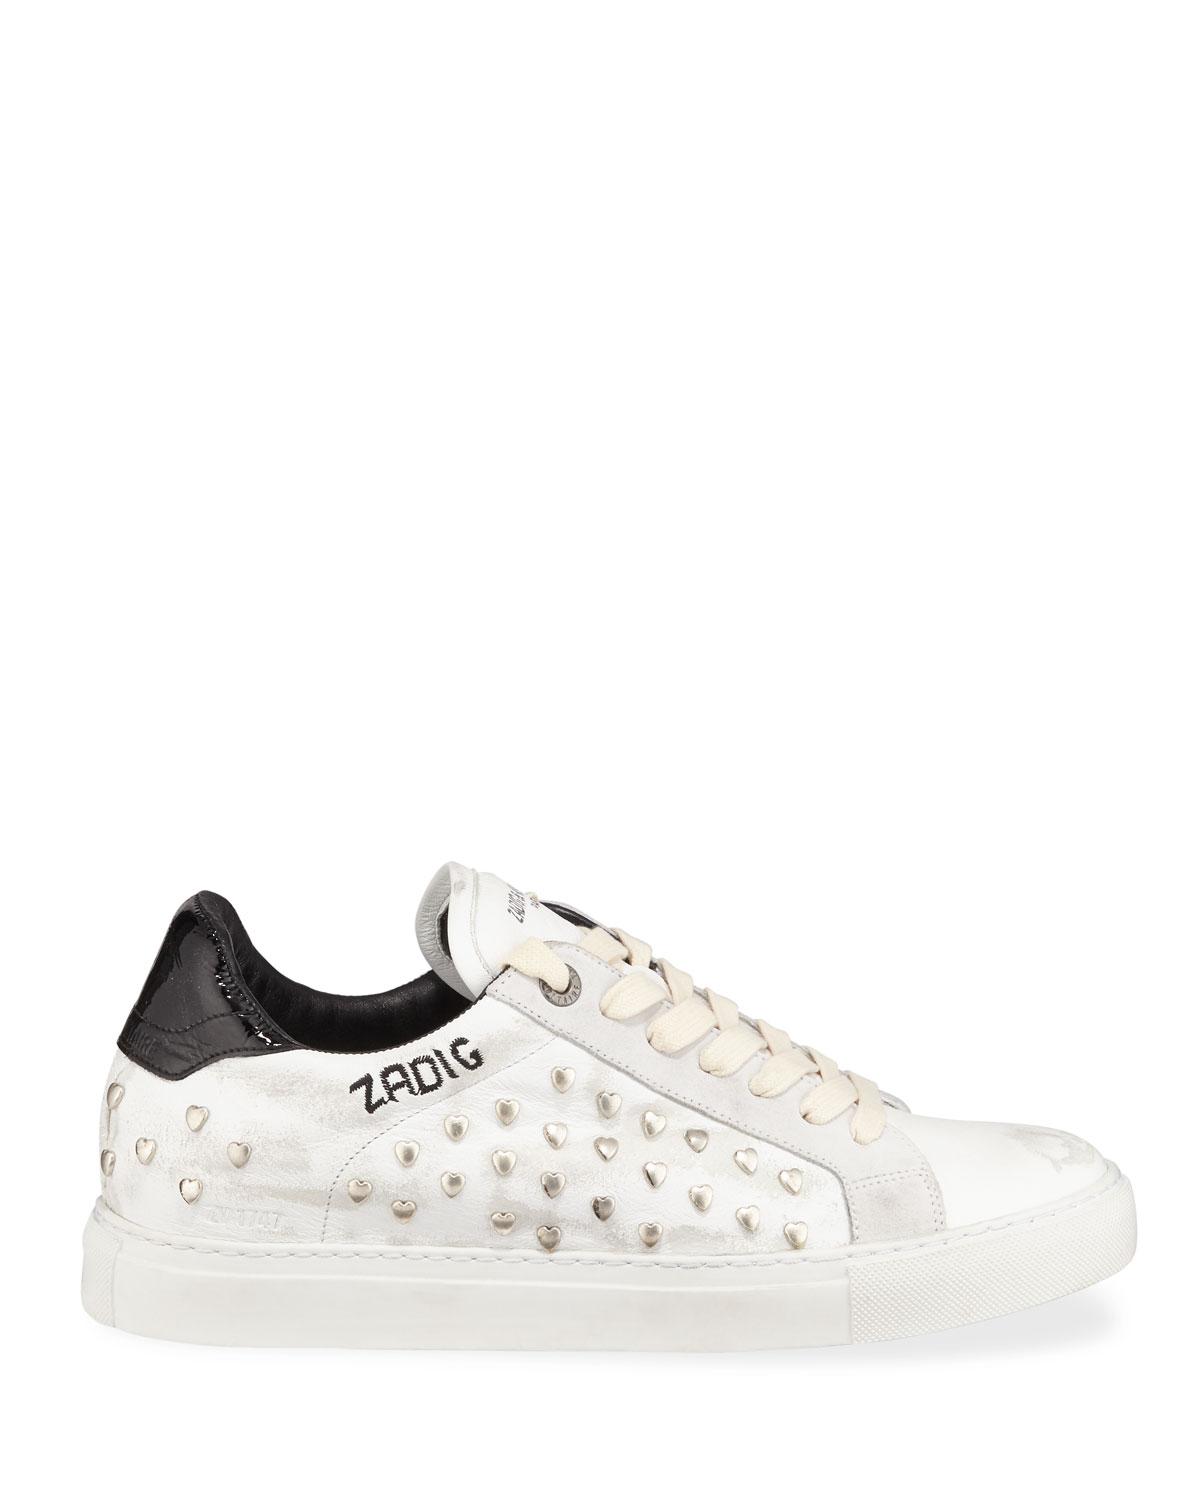 Zadig & Voltaire Zv1747 Distressed Heart-studded Leather Sneaker in ...